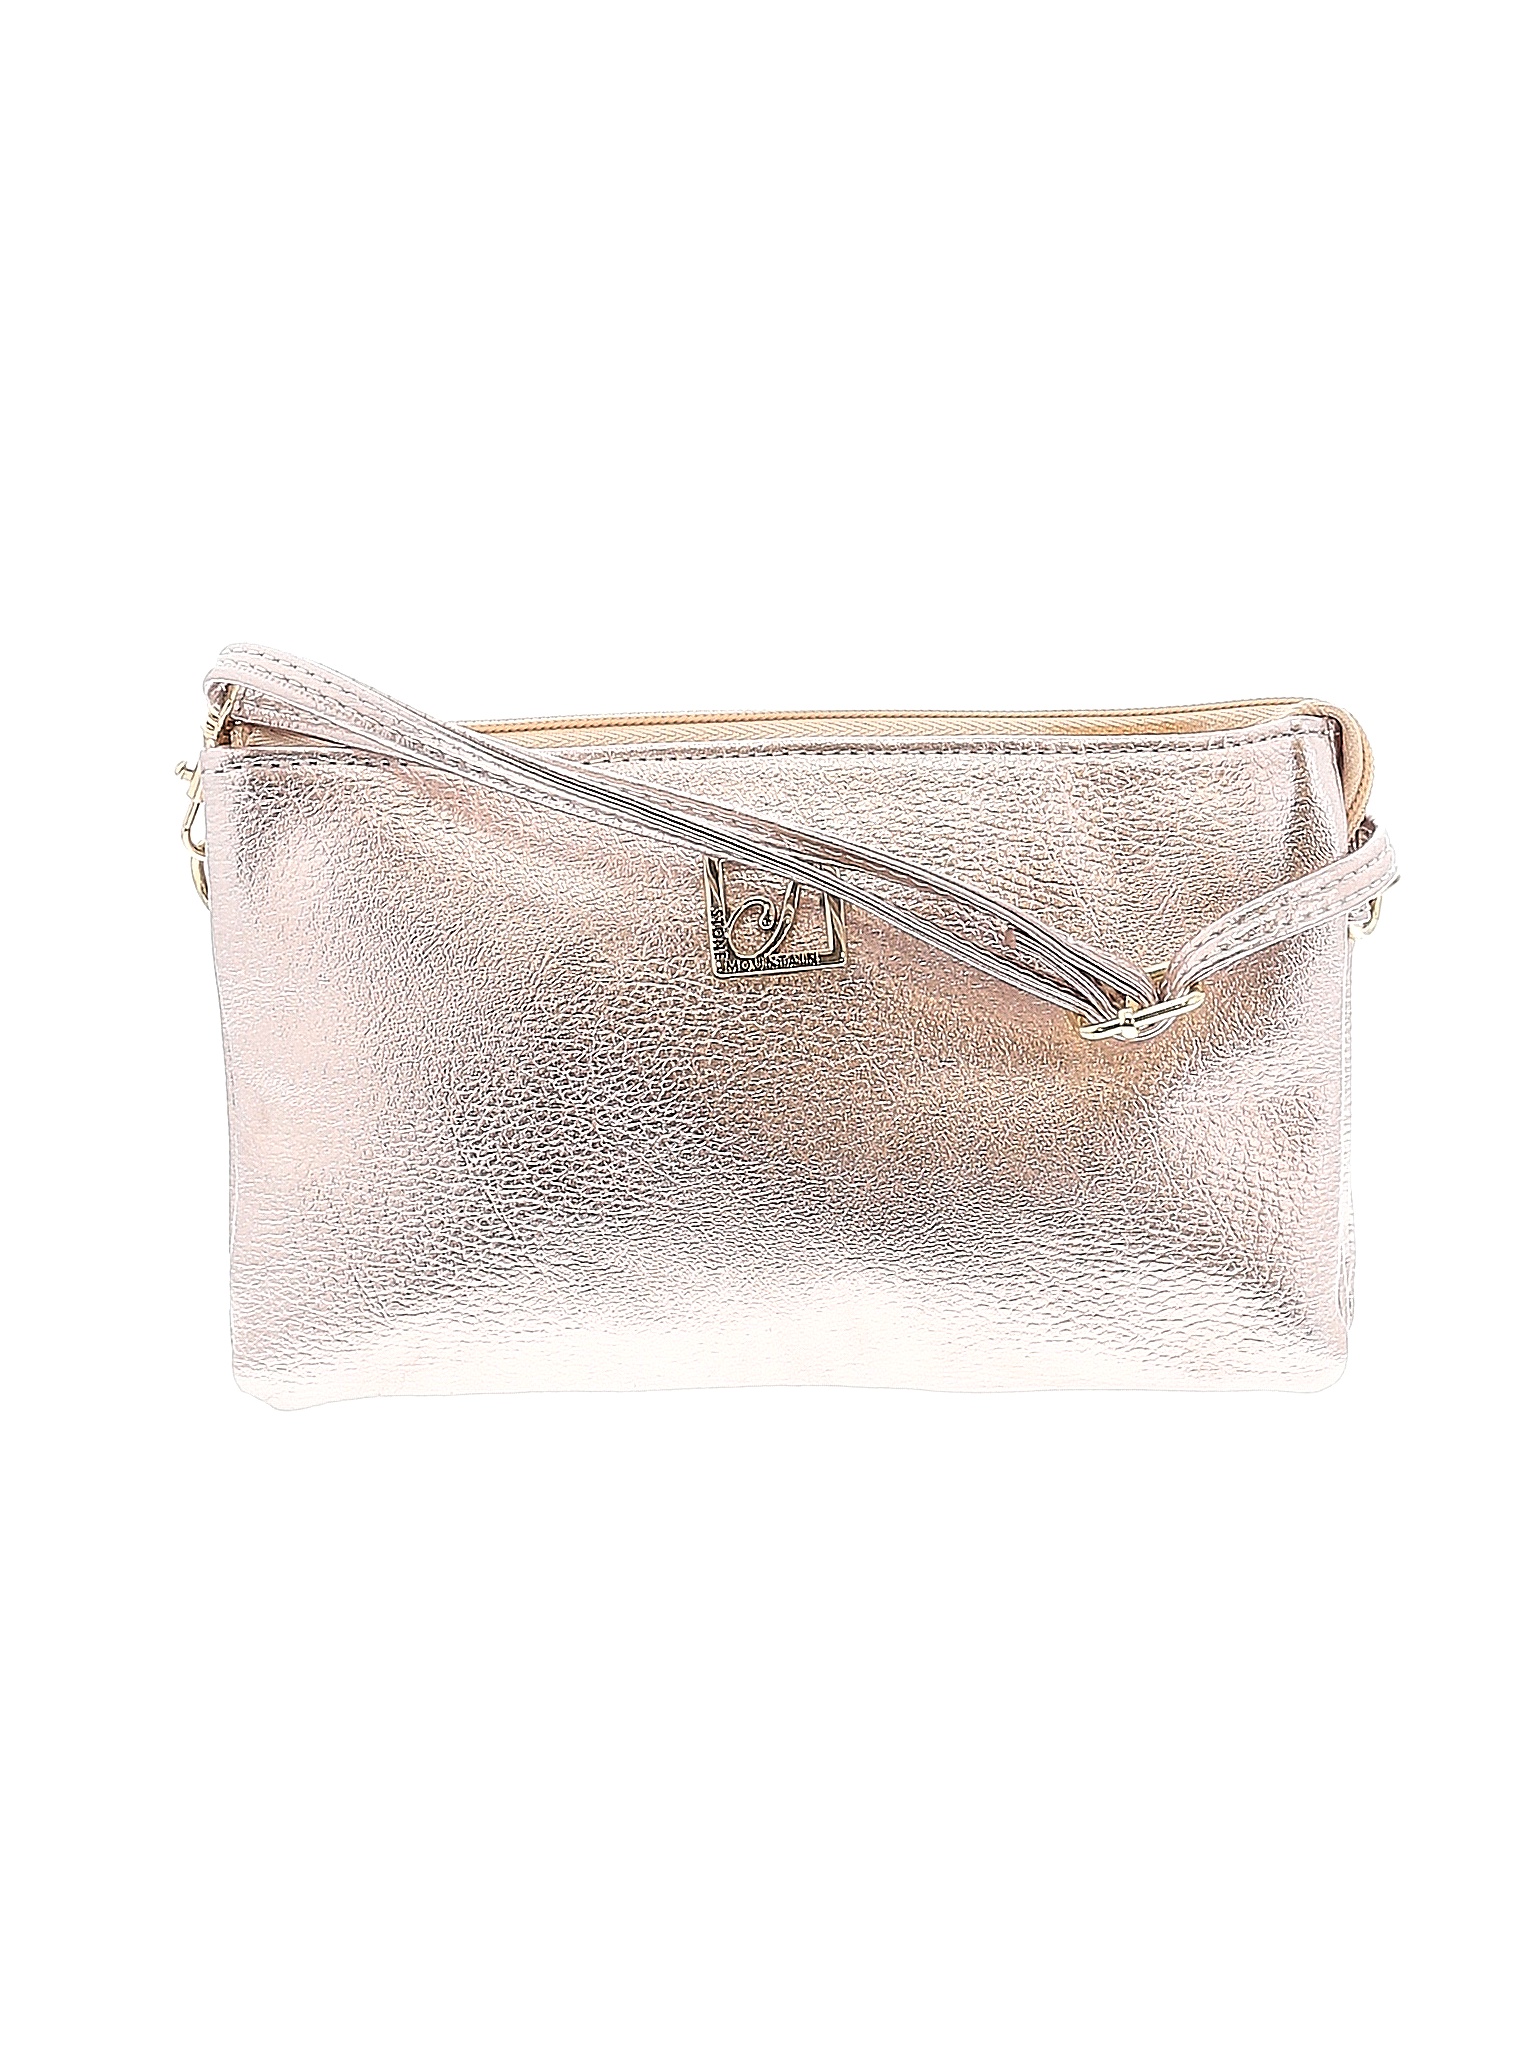 Stone Mountain Solid Gray Pink Crossbody Bag One Size - 74% off | thredUP